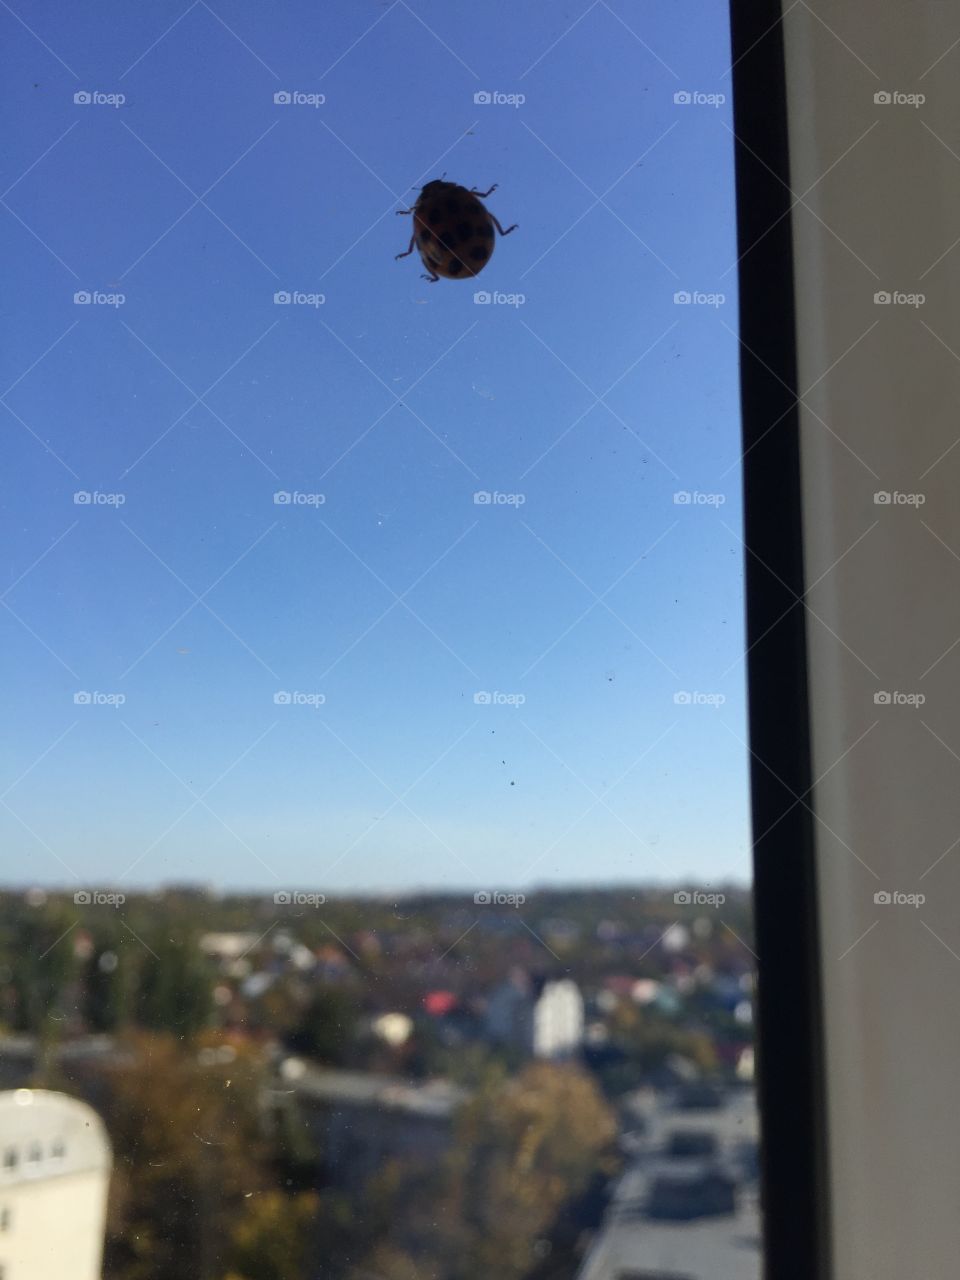 Little Lady bug having a walk away from the horizon. Window view from a house.